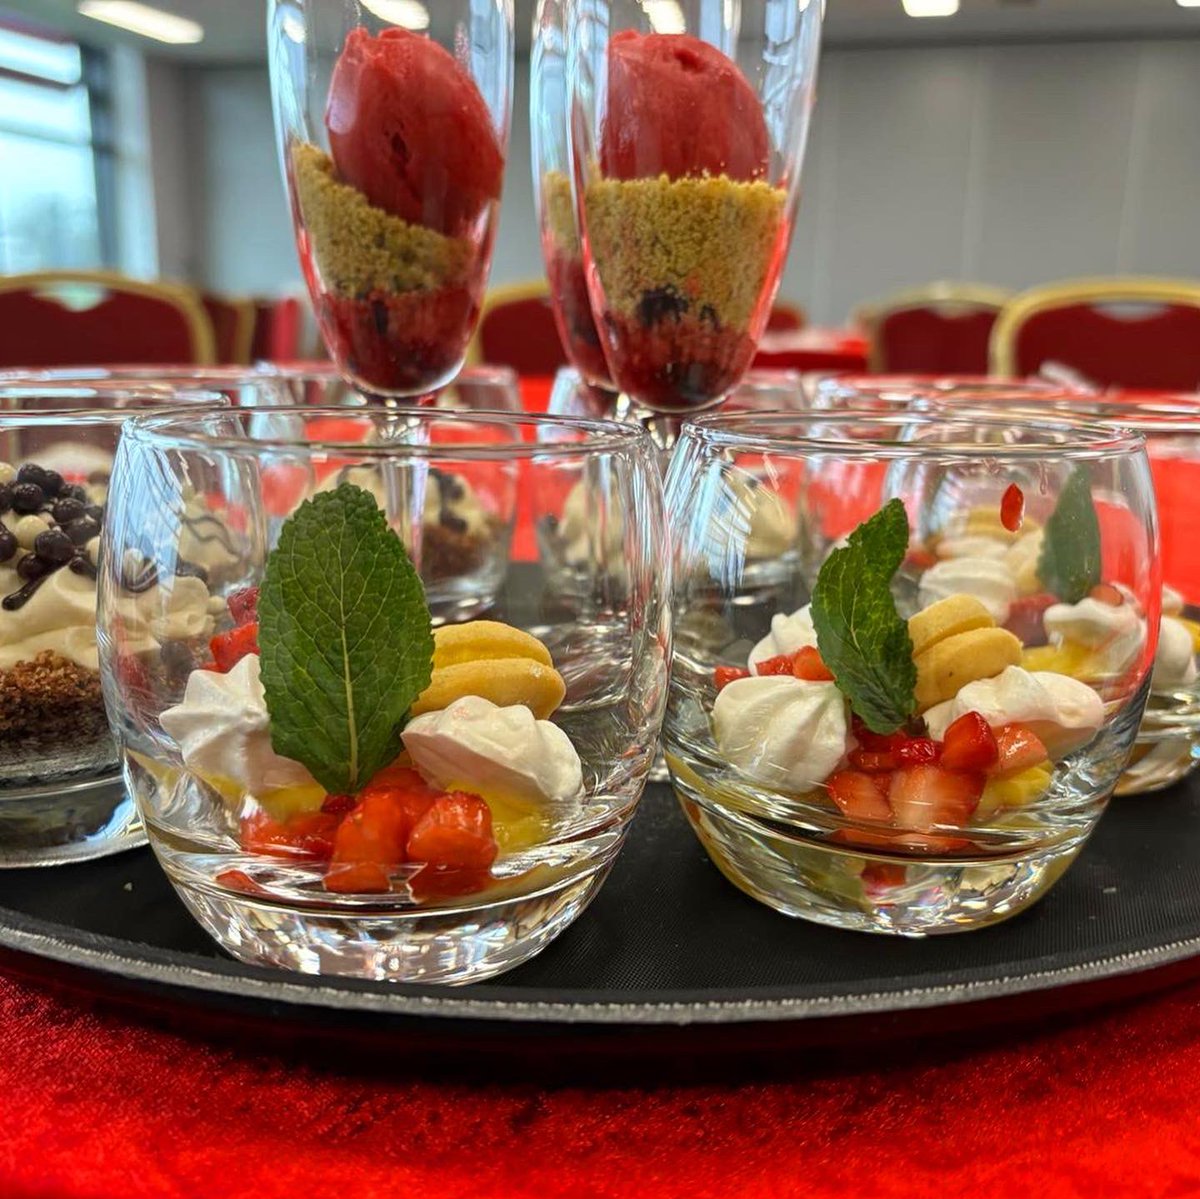 Some fabulous sweet treats for an incredible event ✨❤️

#fuelyourindividuality #sweettreats #springdesserts #events #corporatecatering